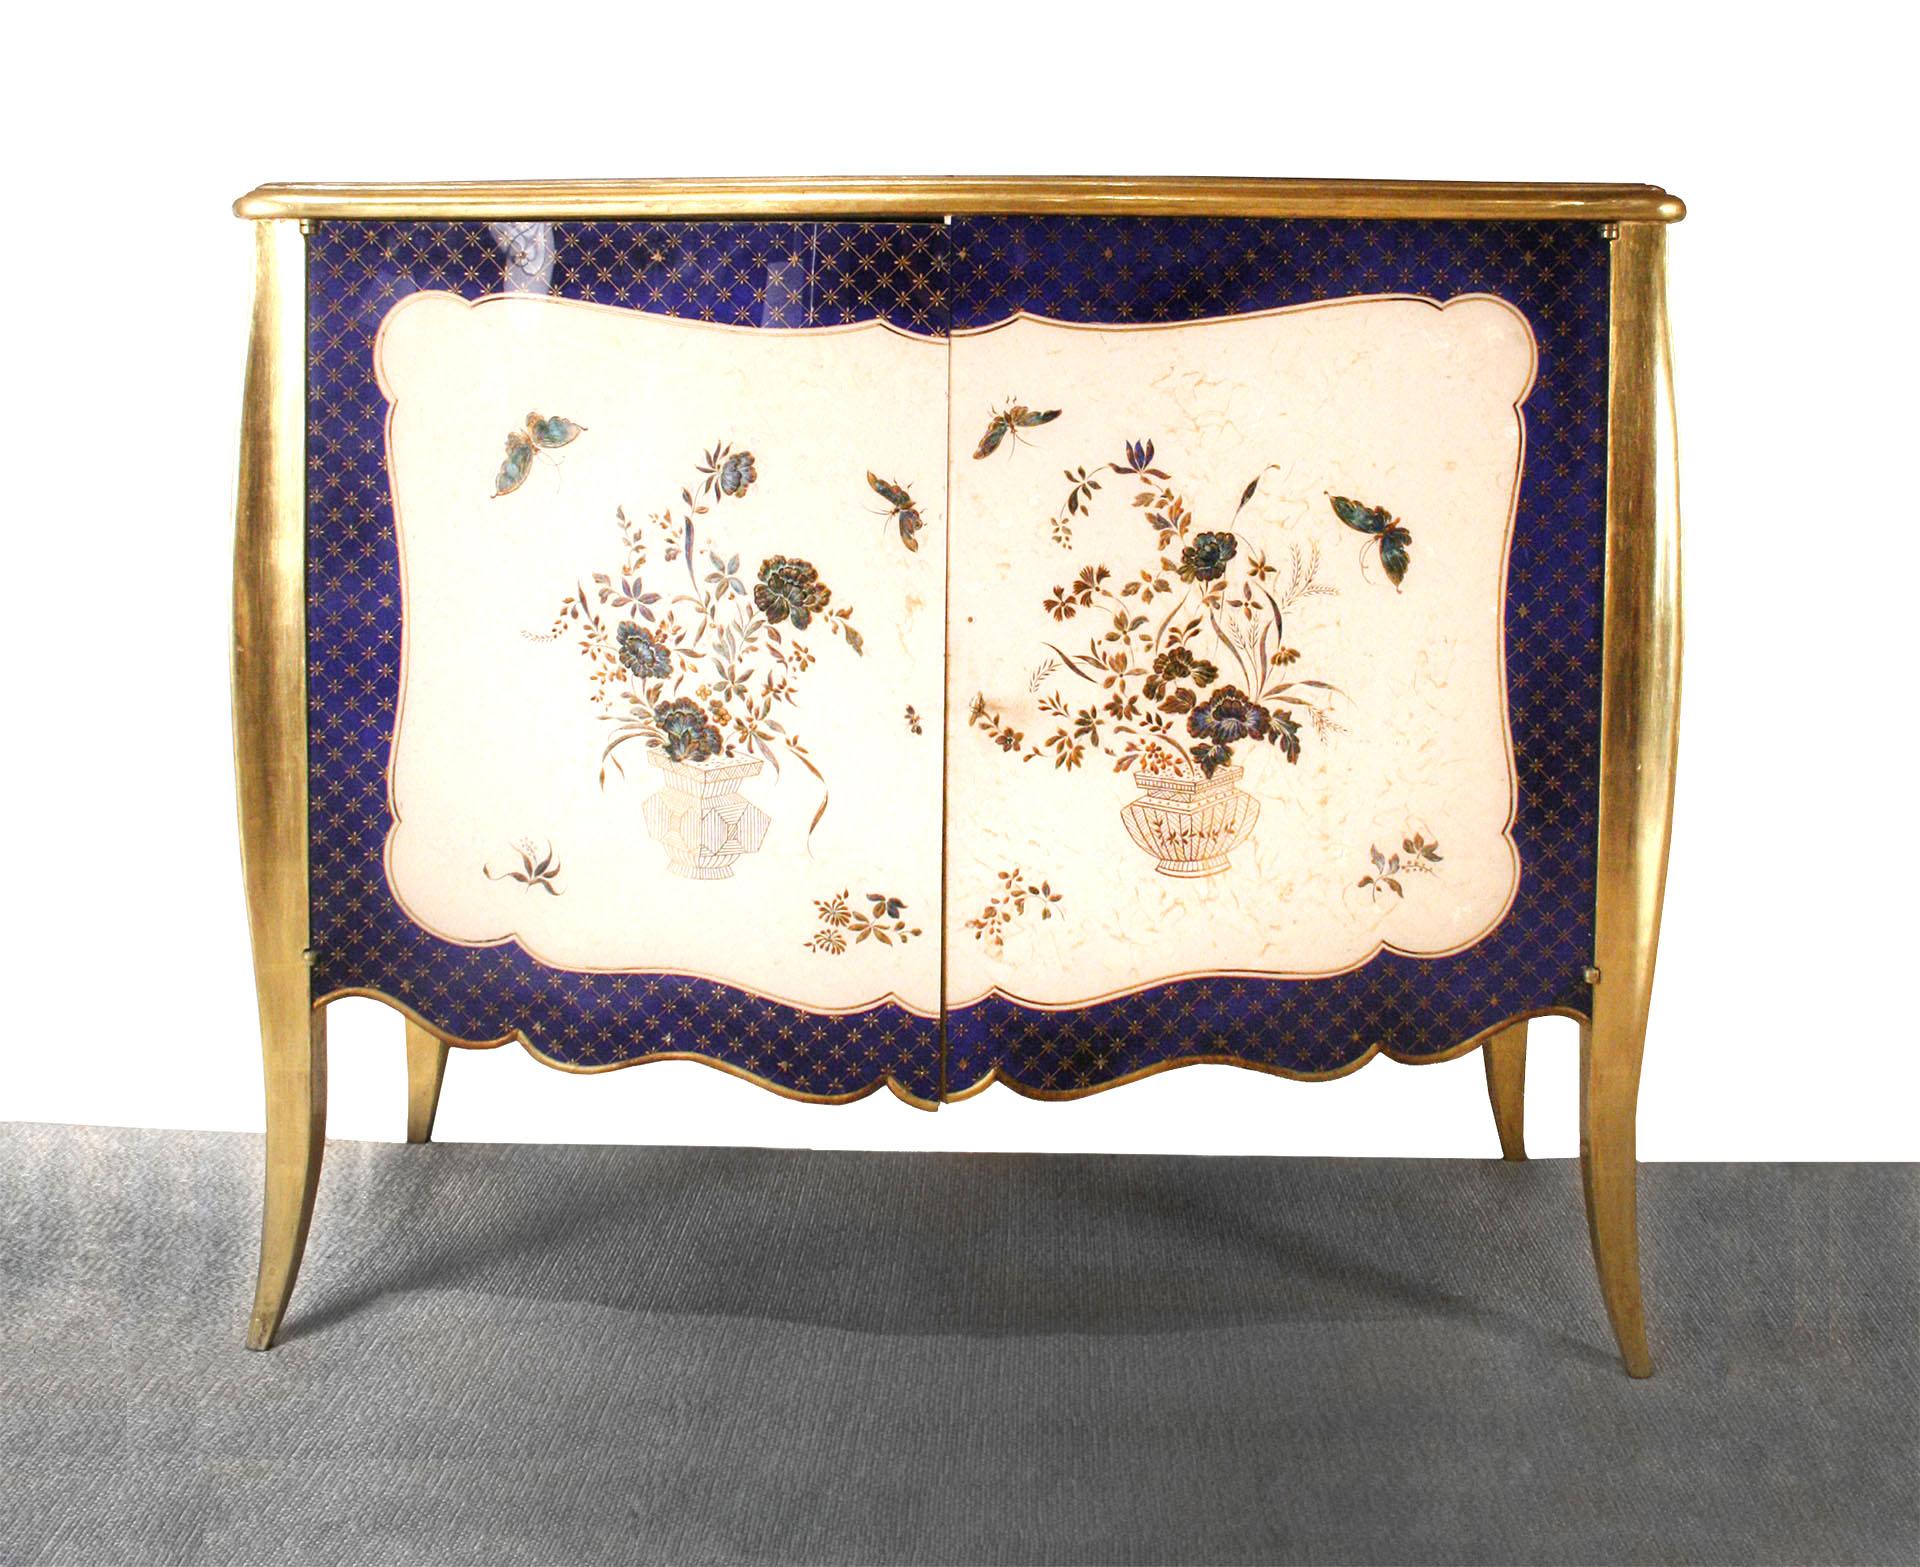 French Louis XV style (1940s) blue and gilt trimmed serpentine shaped commode with 2 lucite over √©glomis√© front doors having a floral and butterfly design.
